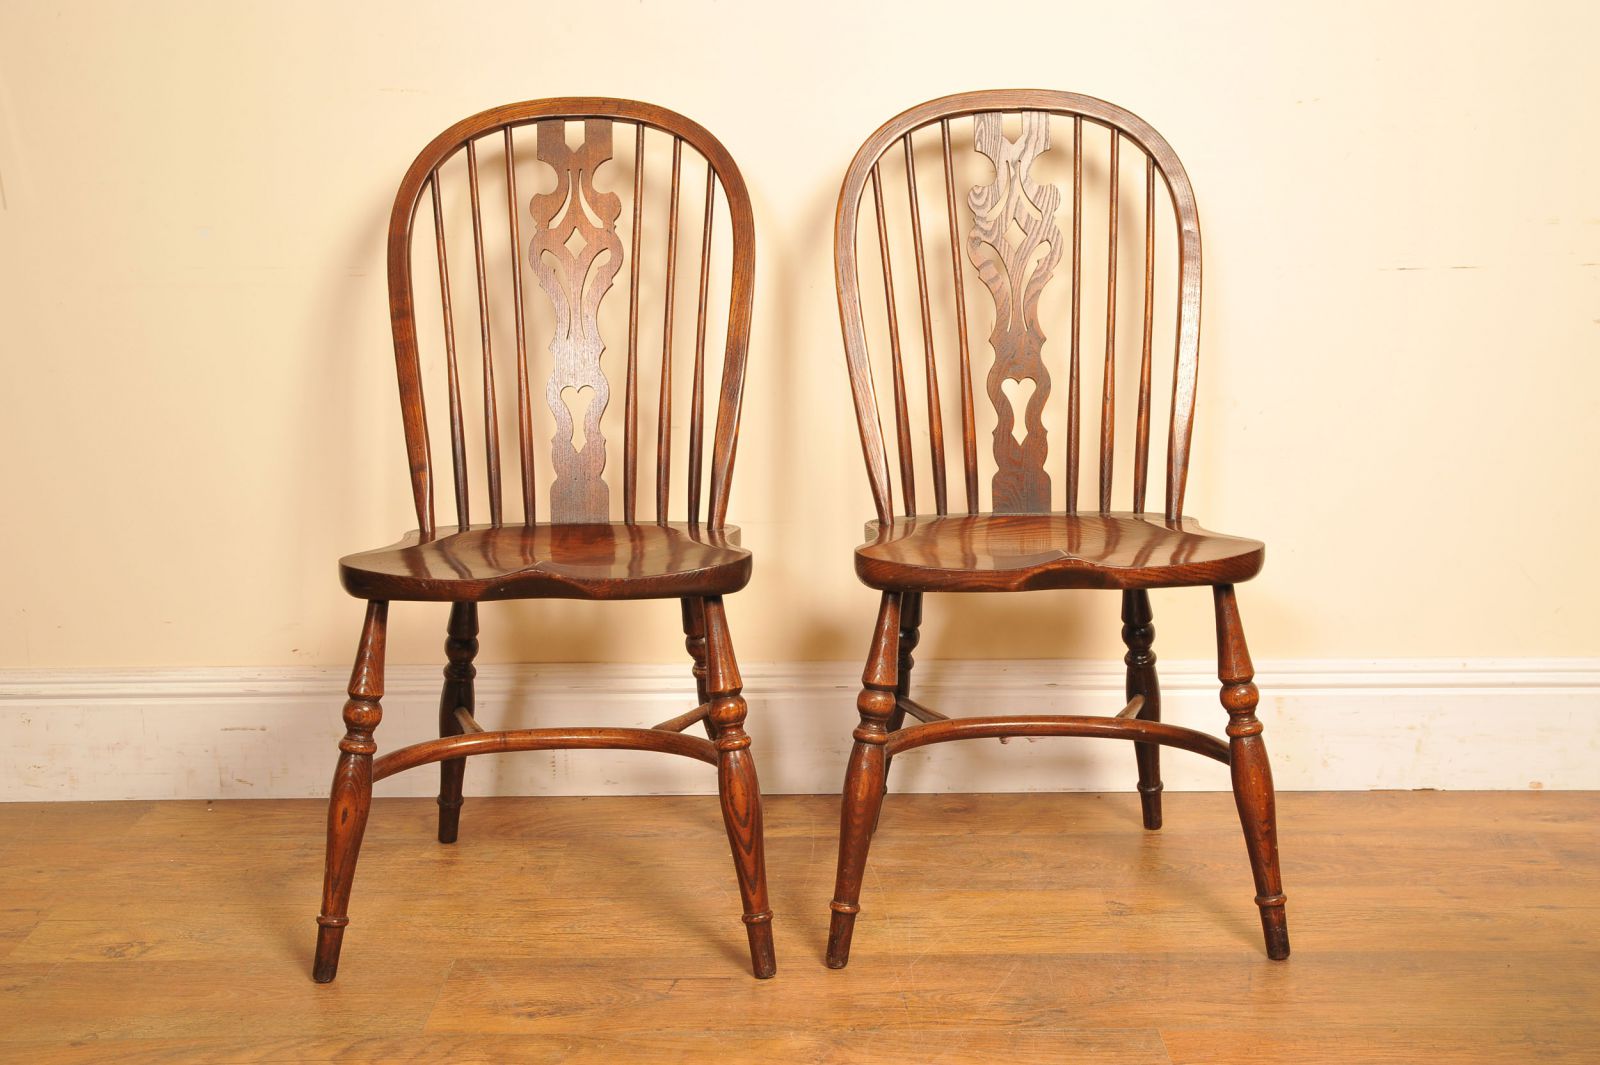 Windsor chairs - for me the ultimate farmhouse kitchen chair